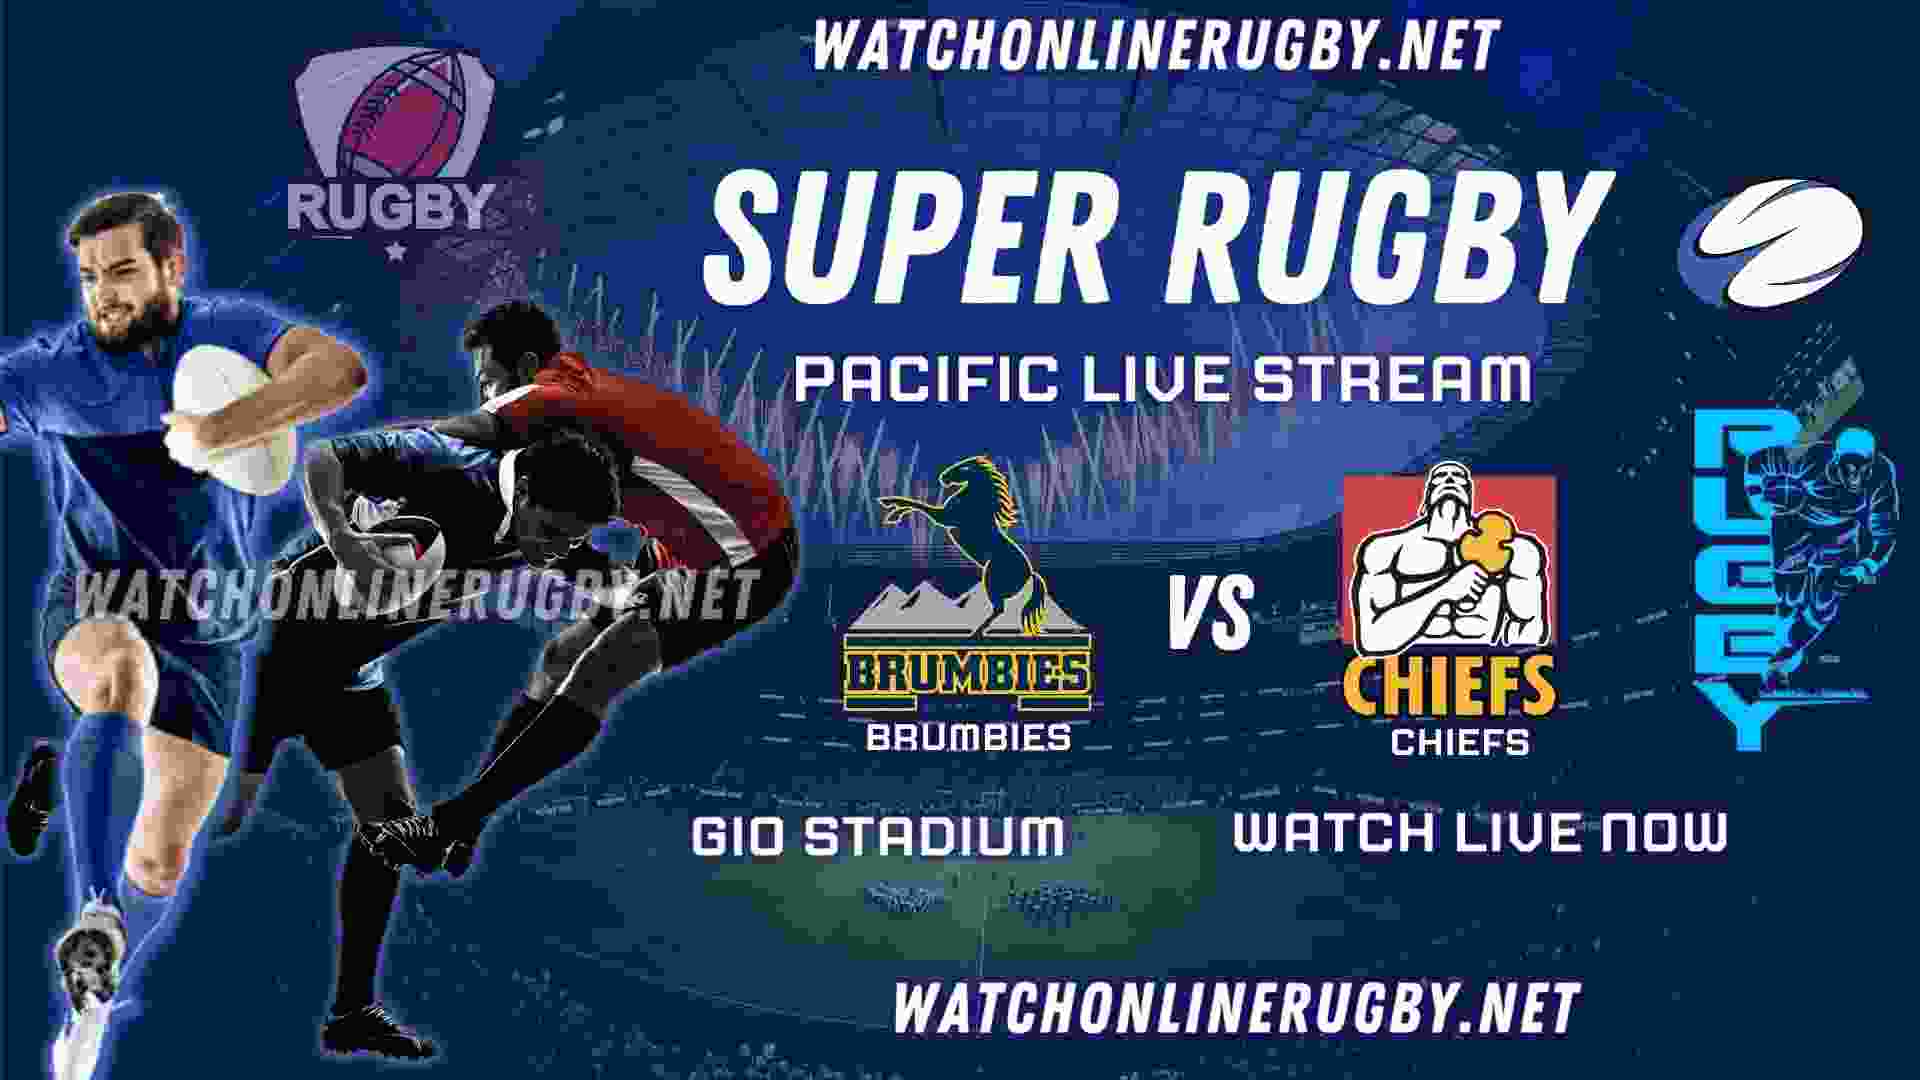 Brumbies Vs Chiefs Live Streaming